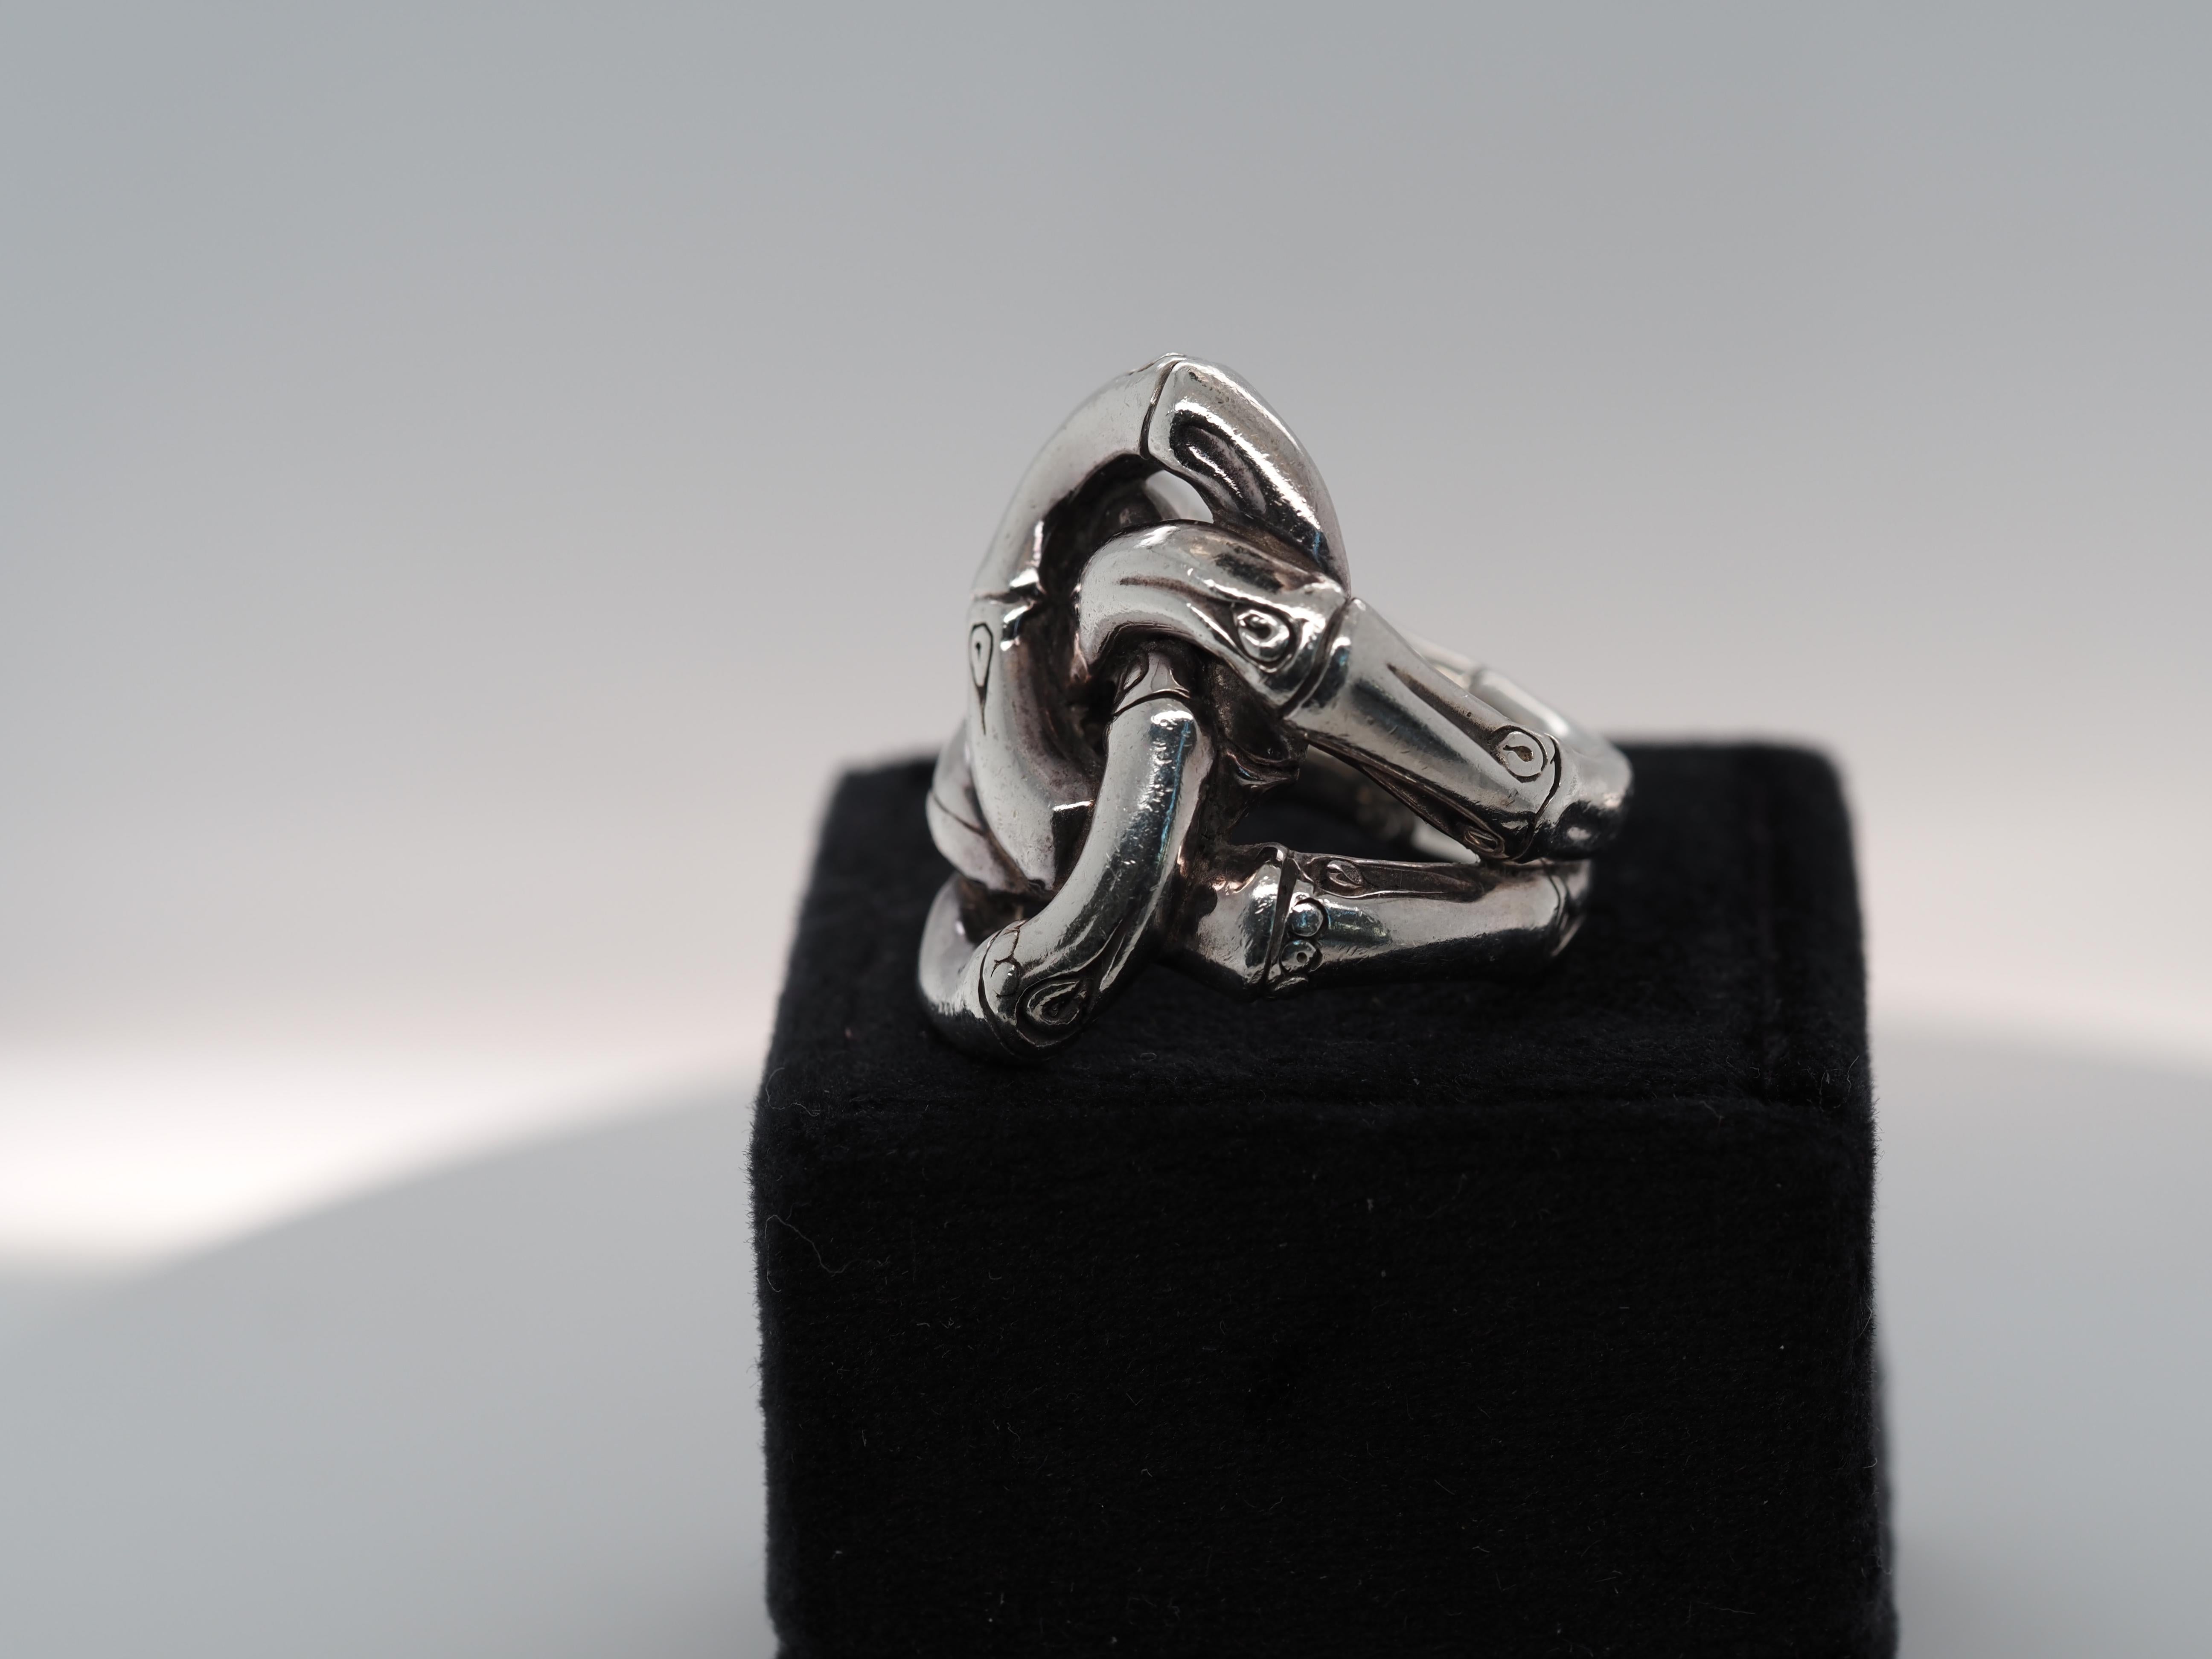 Item Details:
Maker: John Hardy
Ring Size: 7.25
Metal Type: Sterling Silver [Hallmarked, and Tested]
Weight: 21.9 grams
‌
Band Width: 7.0 mm
Condition: Excellent